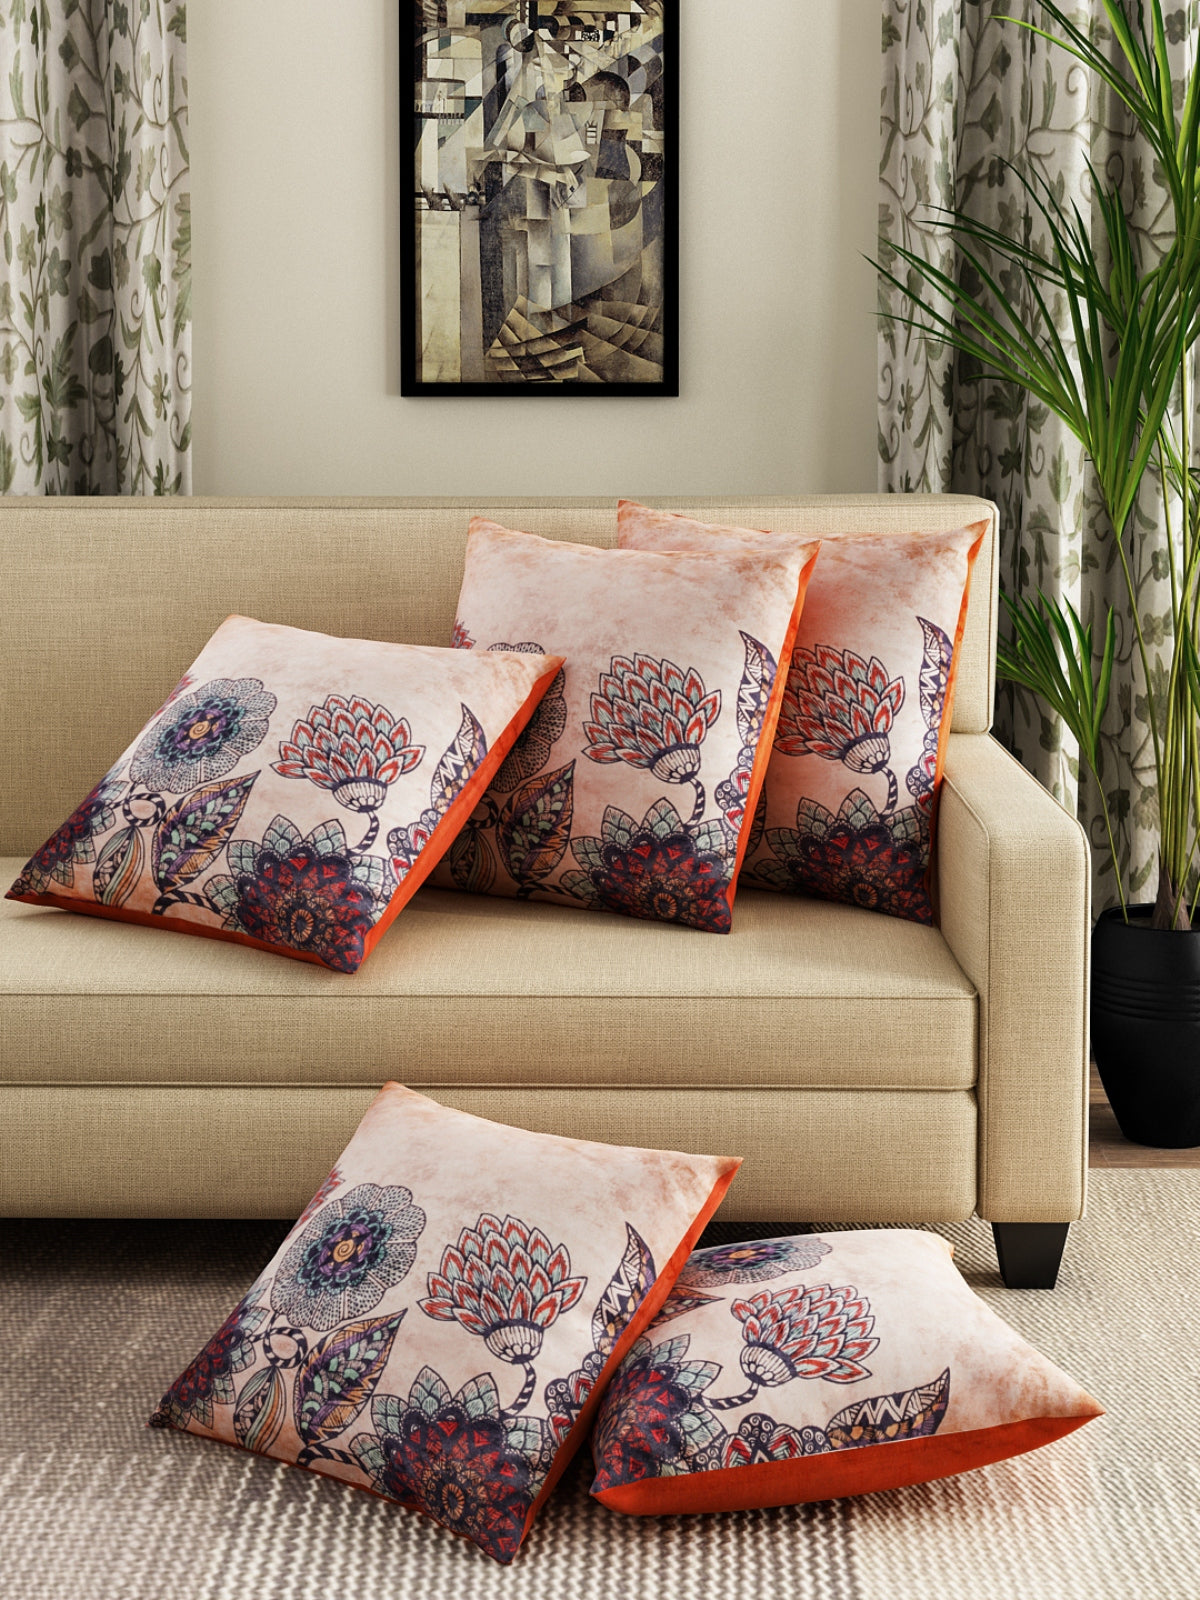 Soft Velvet Floral Print Throw Pillow/Cushion Covers Set of 5, 16x16 inches - Multicolor